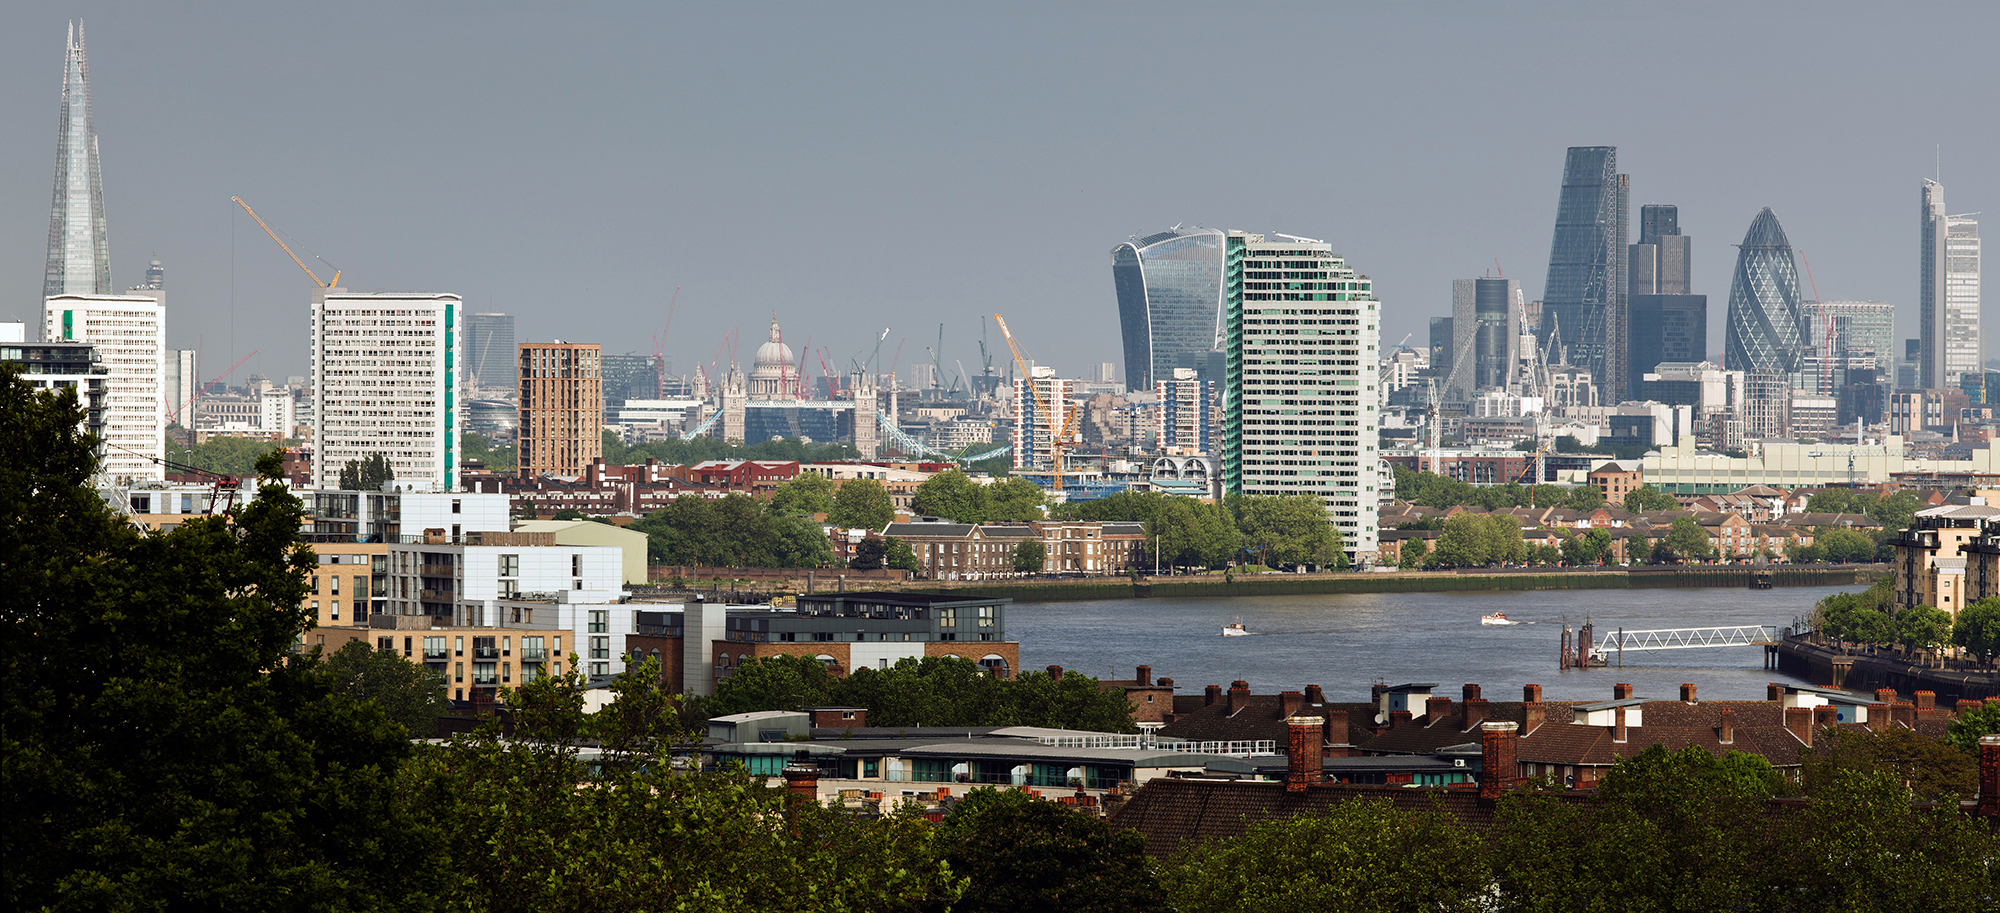 Panoramic view towards the City of London with high rise buildings